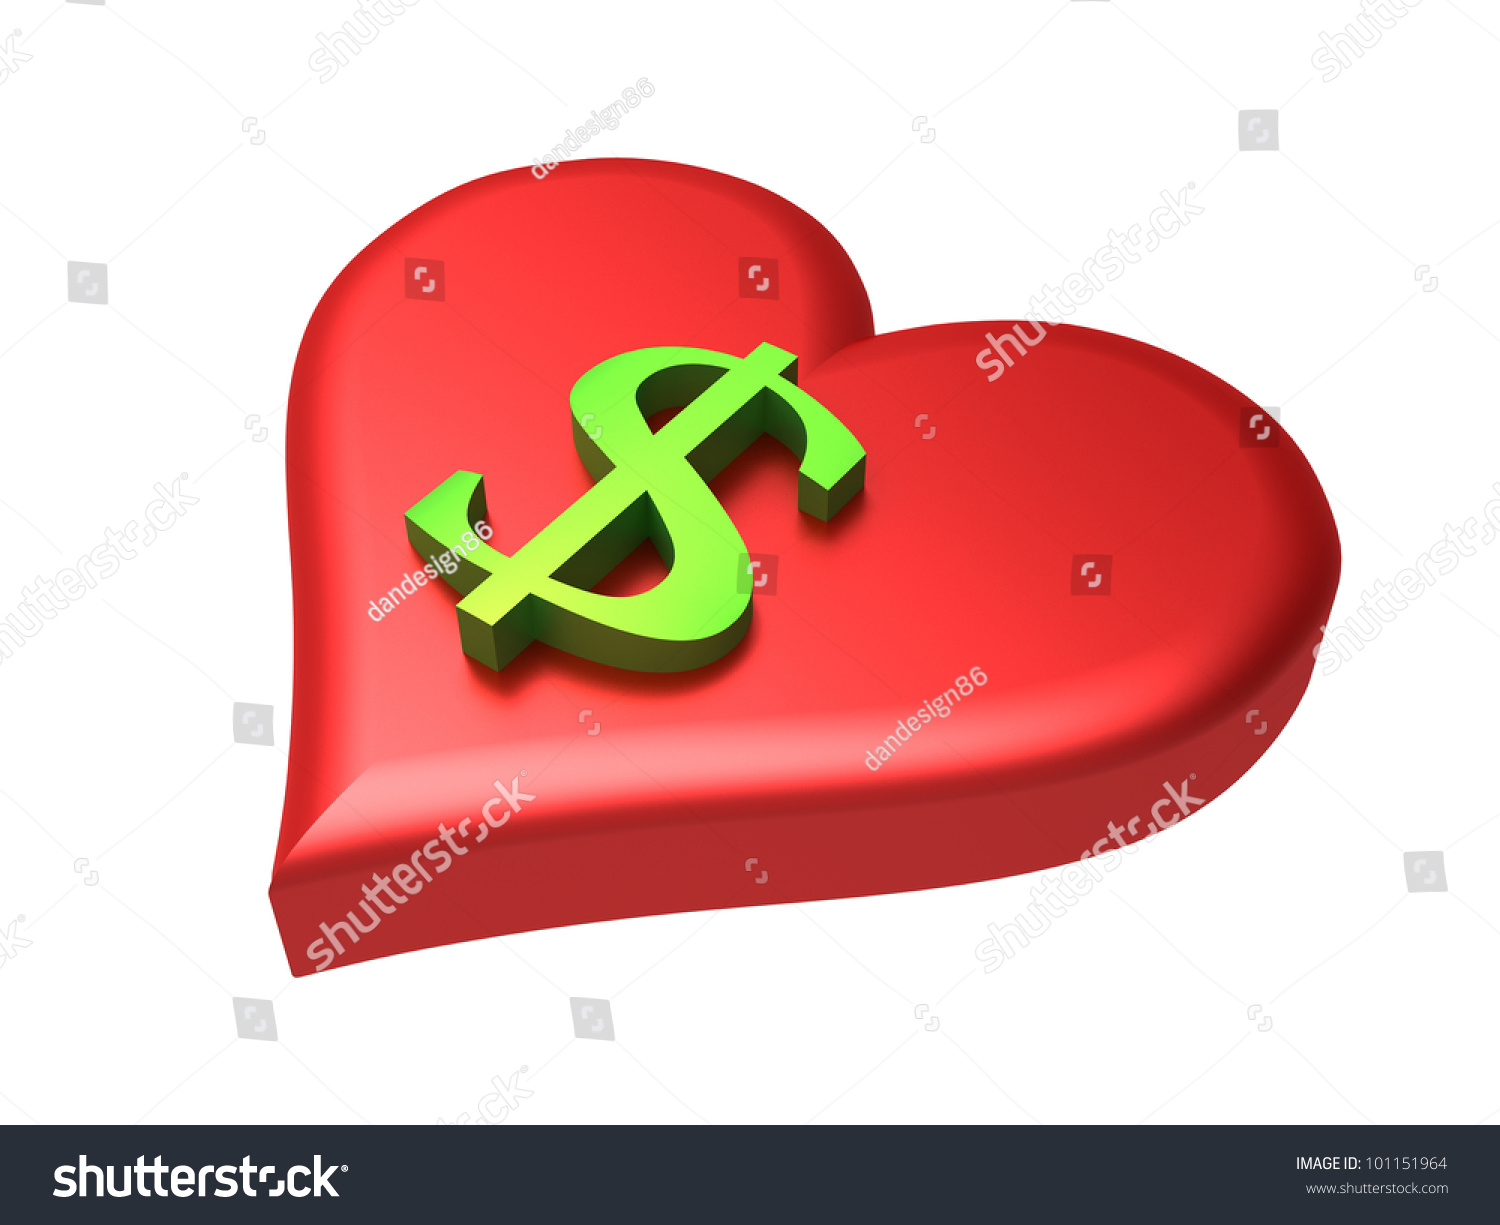 Rendering Of Heart With The Dollar Symbol Stock Photo 101151964